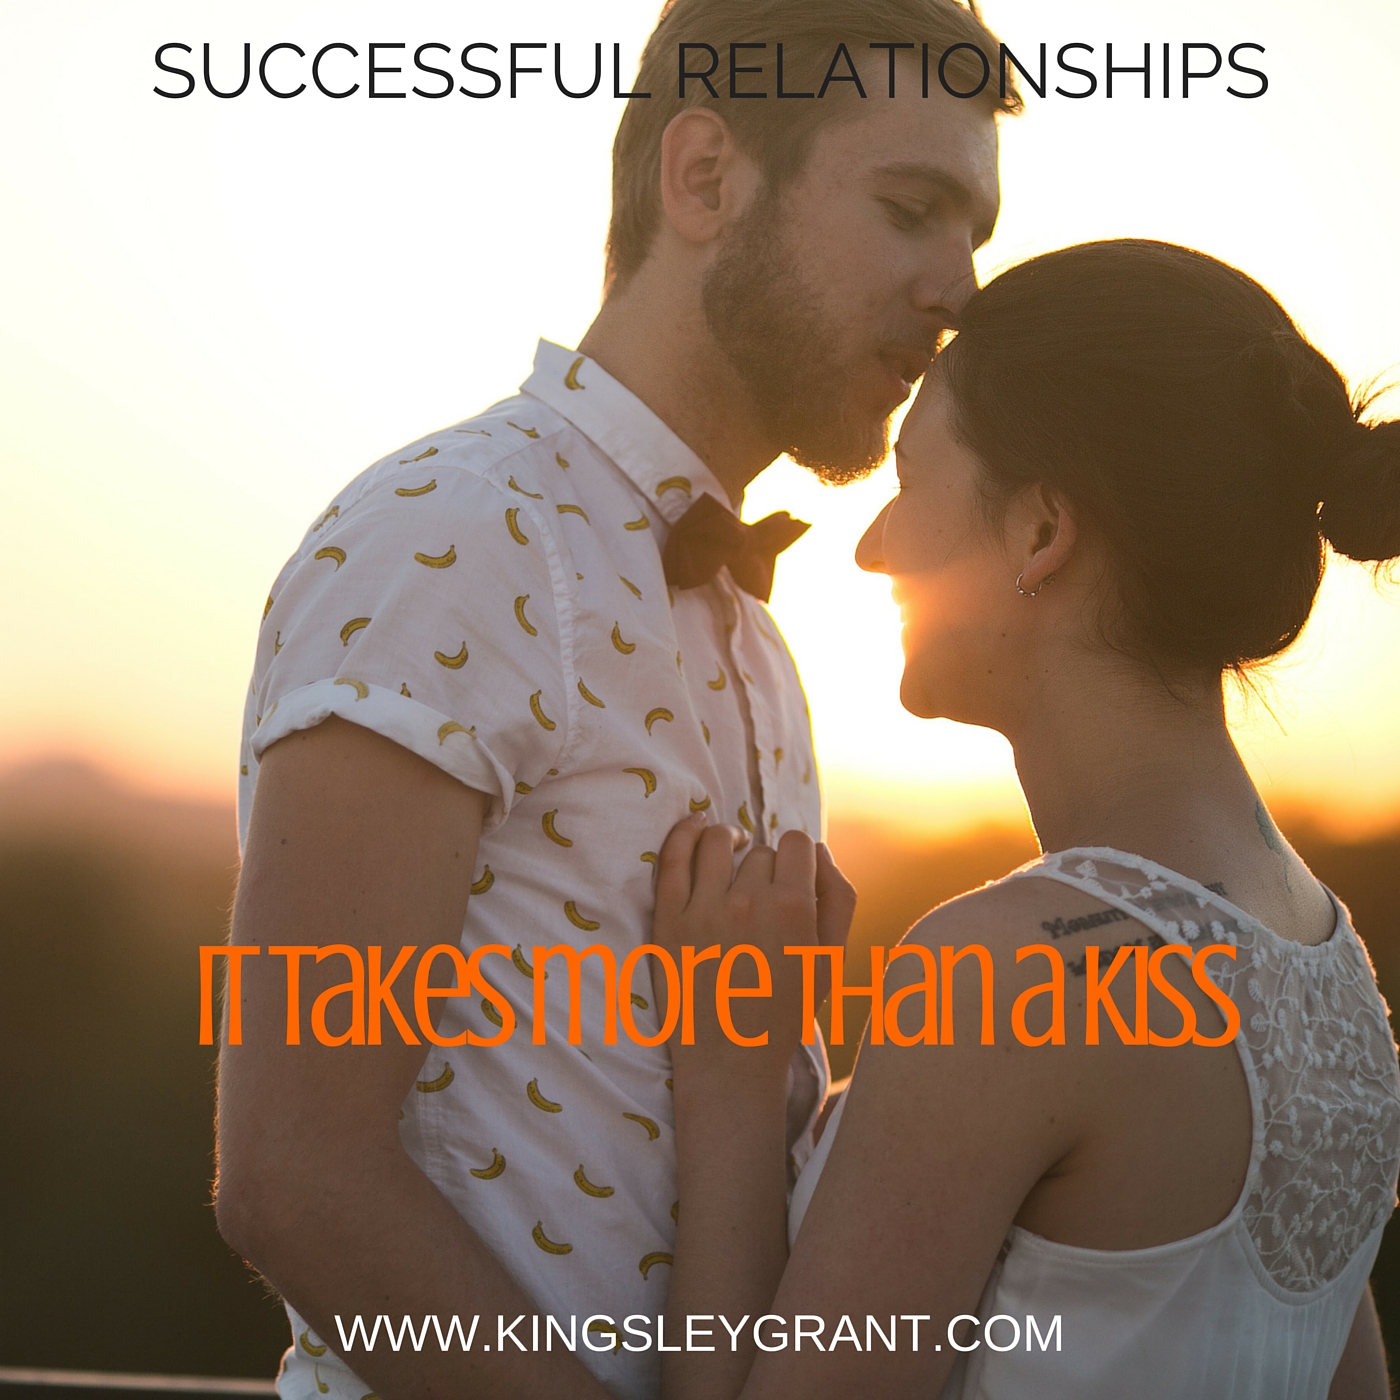 Experience Successful Relationships With These 3 Secret Habits